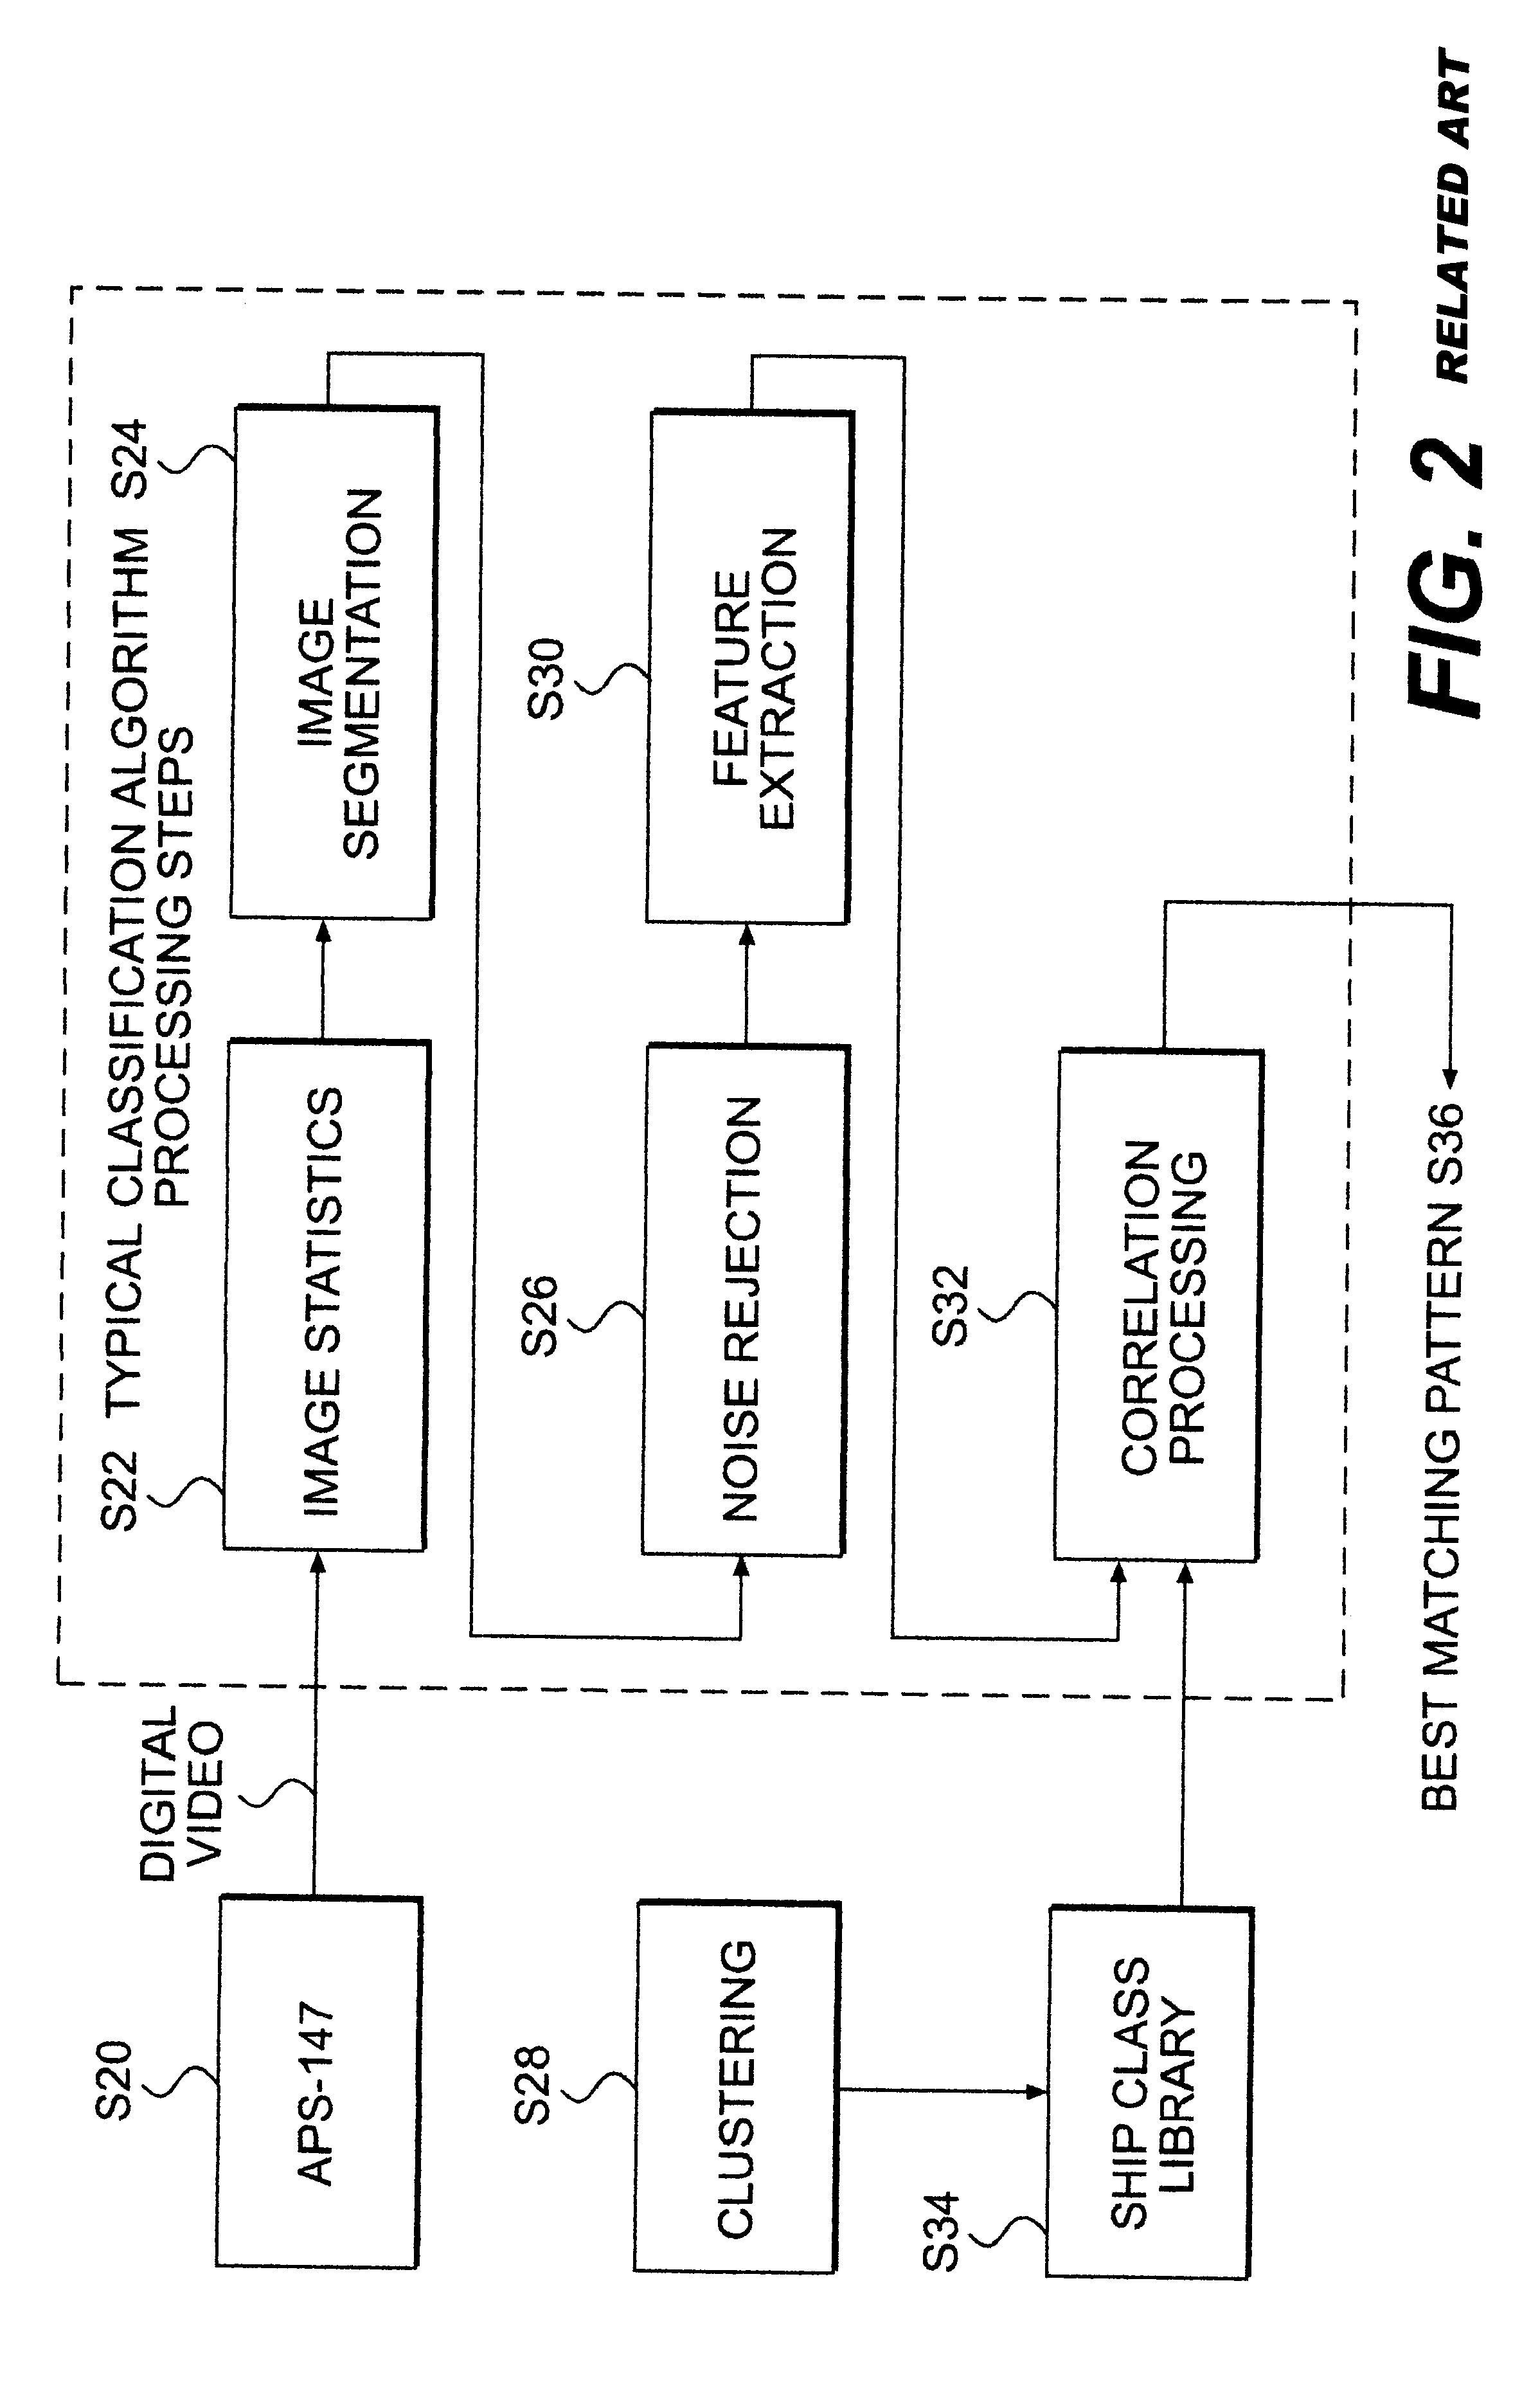 A-scan ISAR classification system and method therefor